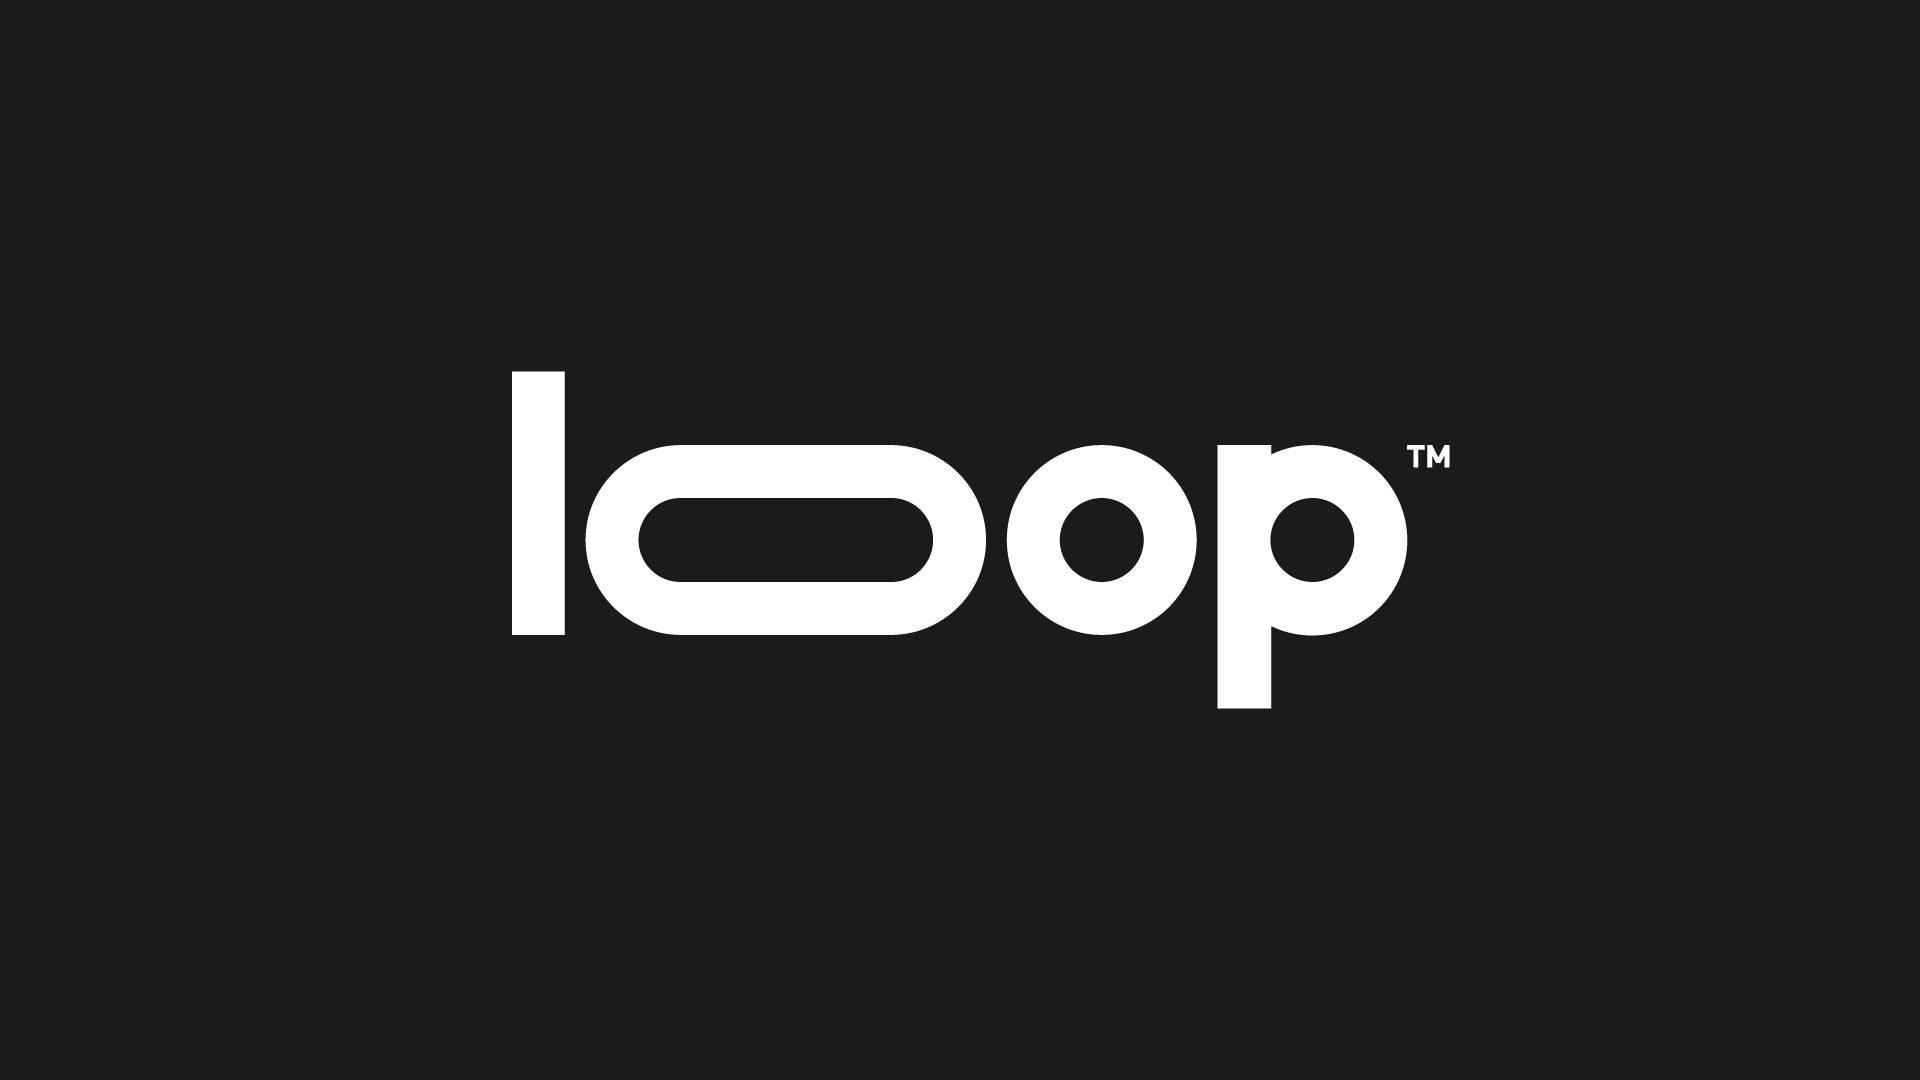 Loop Media, Inc. Announces Partnership With TiVo to Add 18 New Music Video Channels to the TiVo+ Content Network